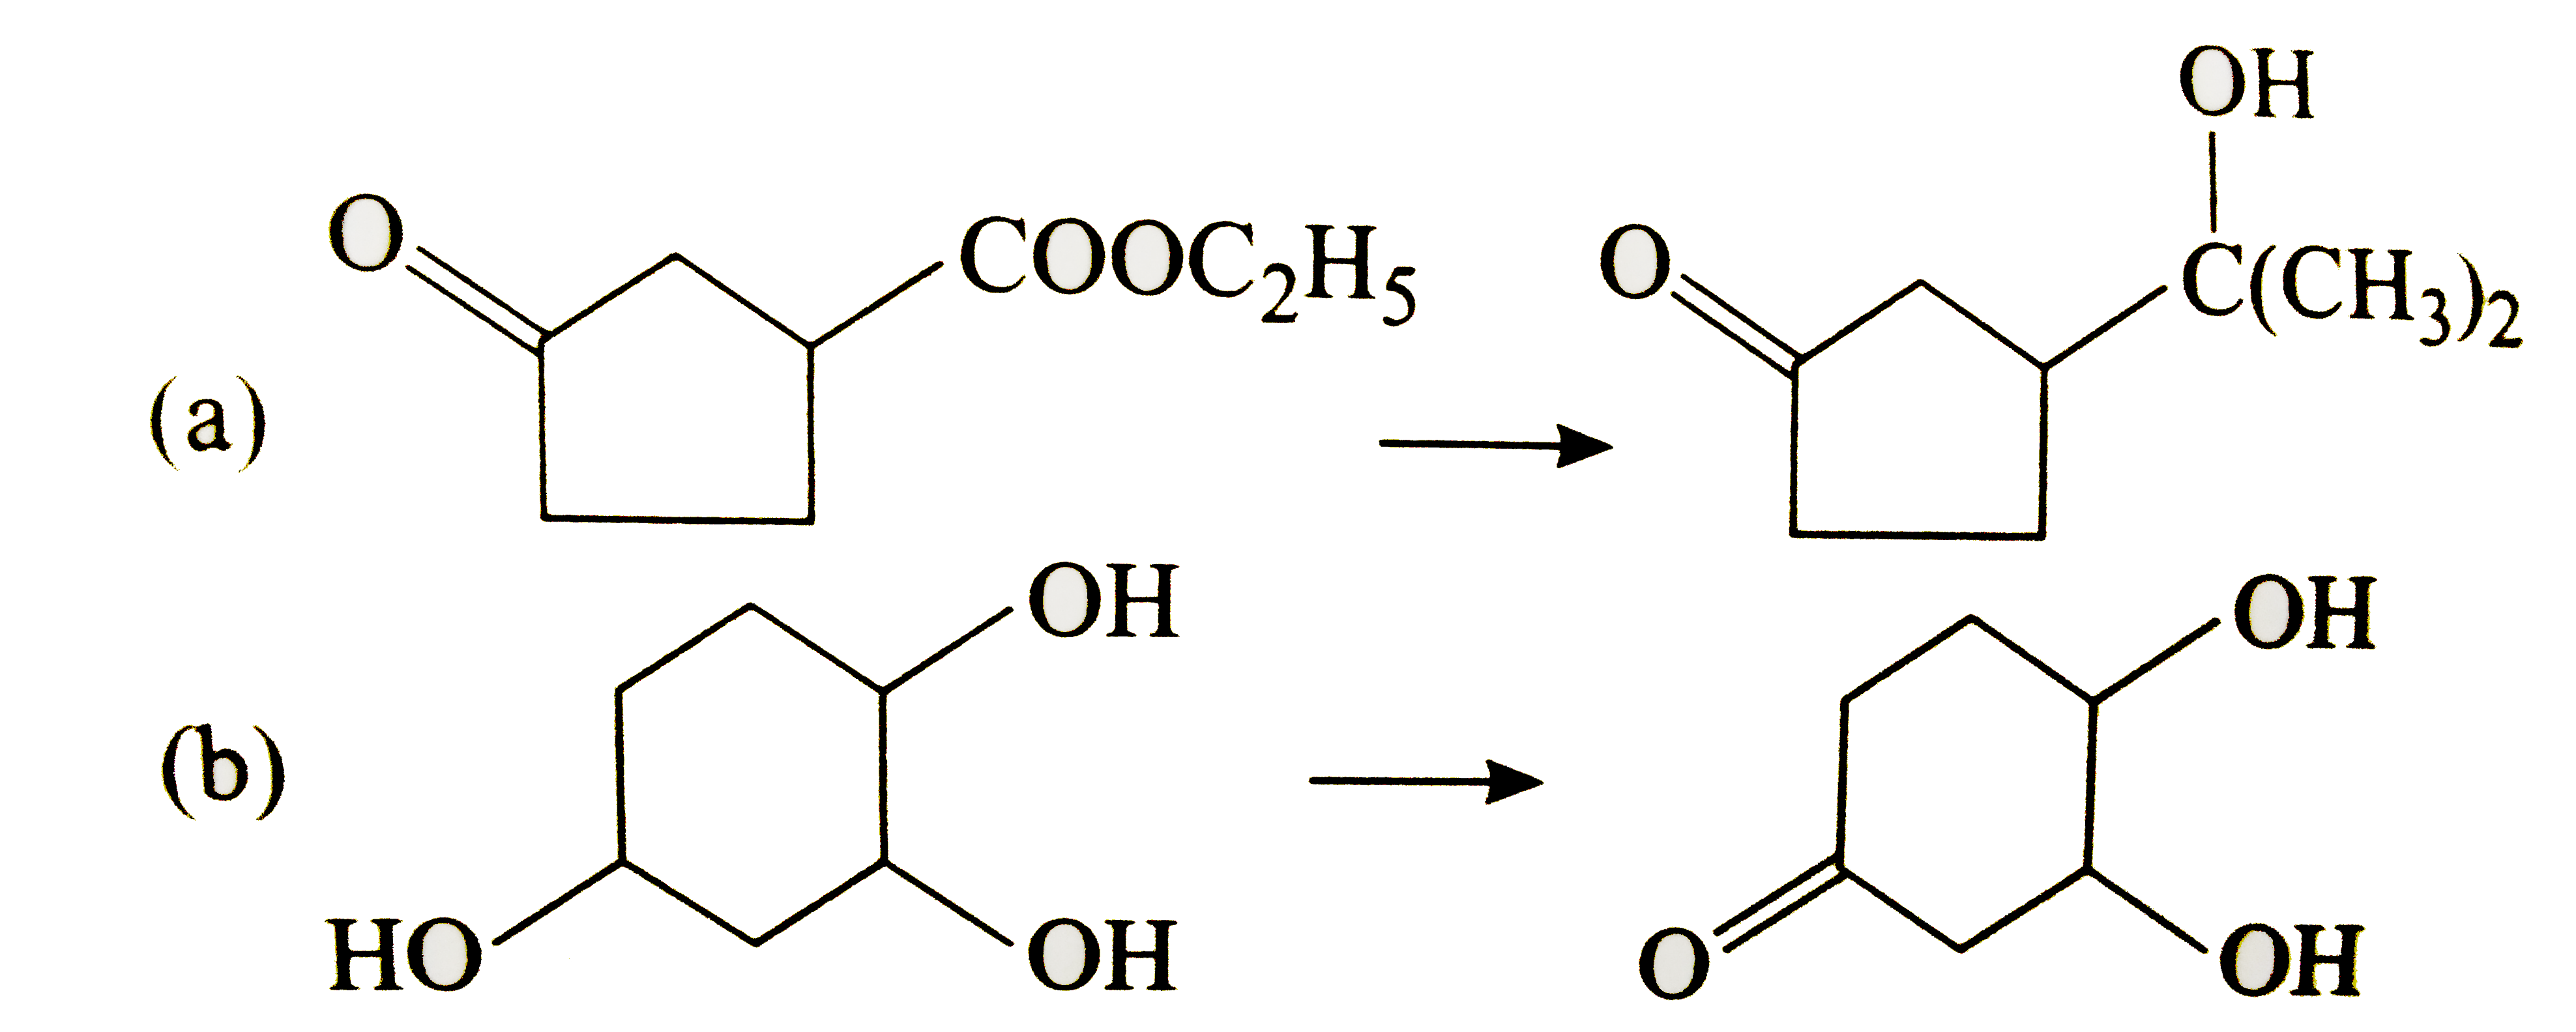 Outline a synthesis of each alcohol from the indicating starting materials :